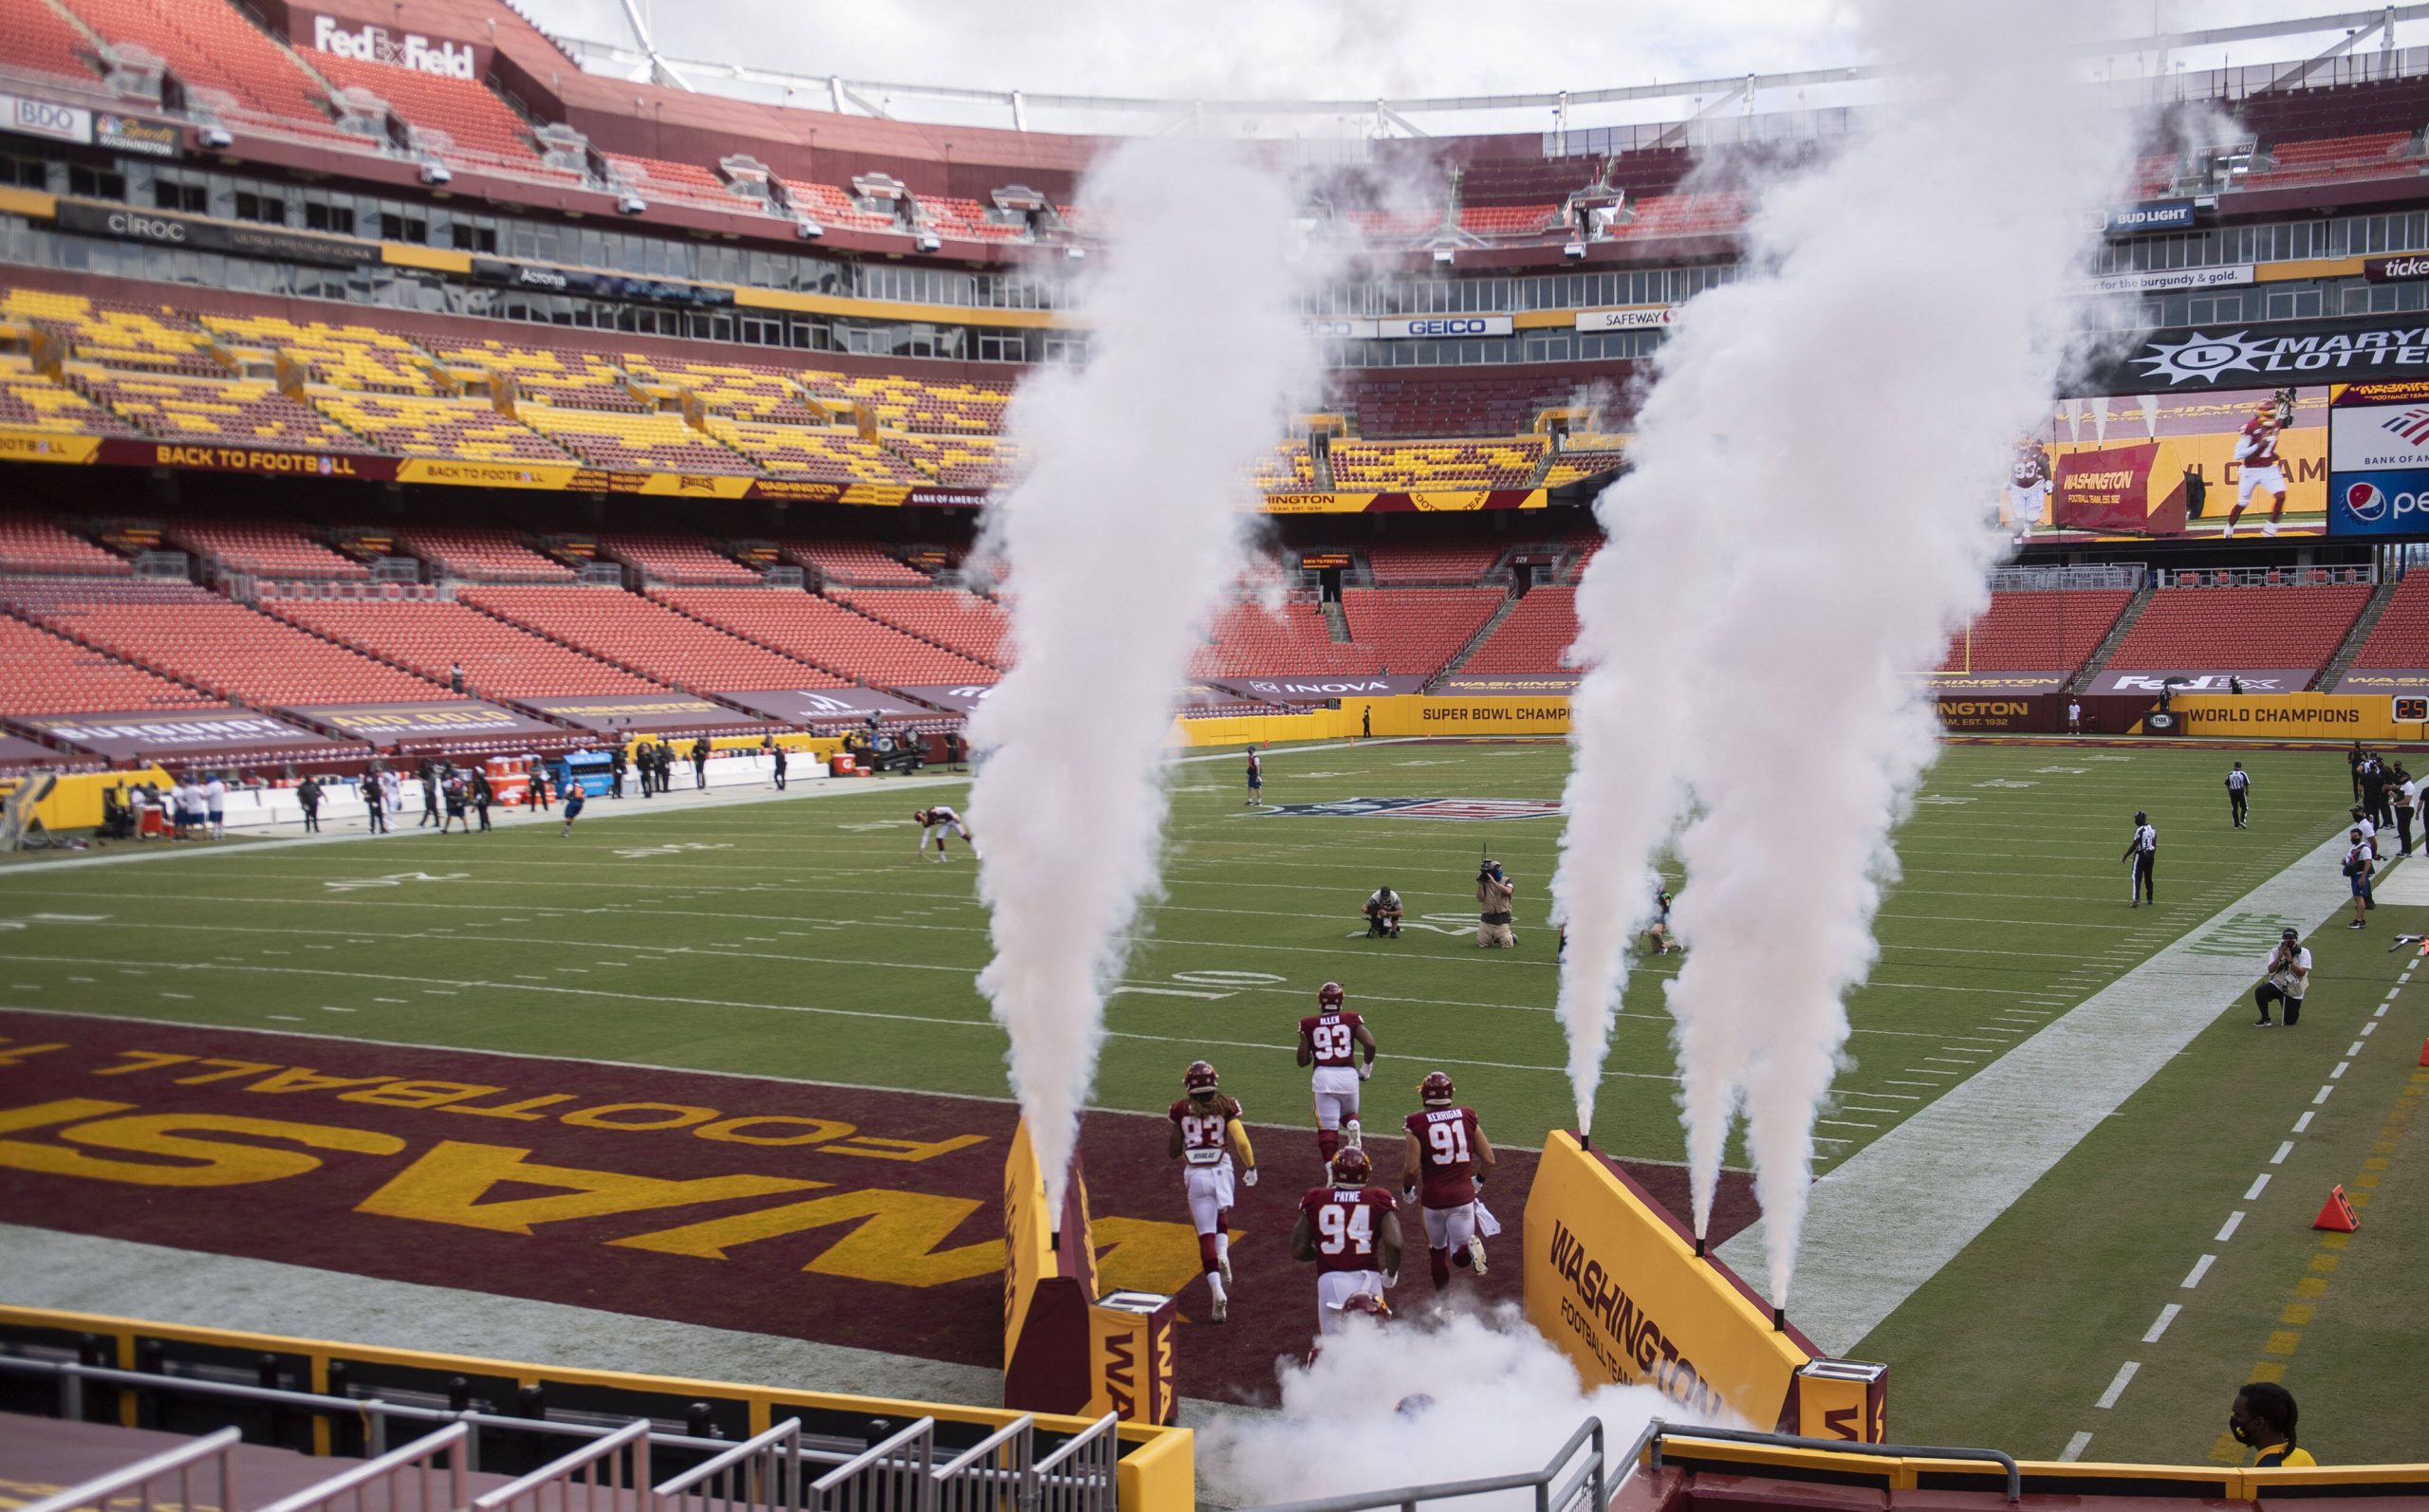 The Washington Football Team takes the field to an empty stadium for their game against the Philadelphia Eagles at FedE